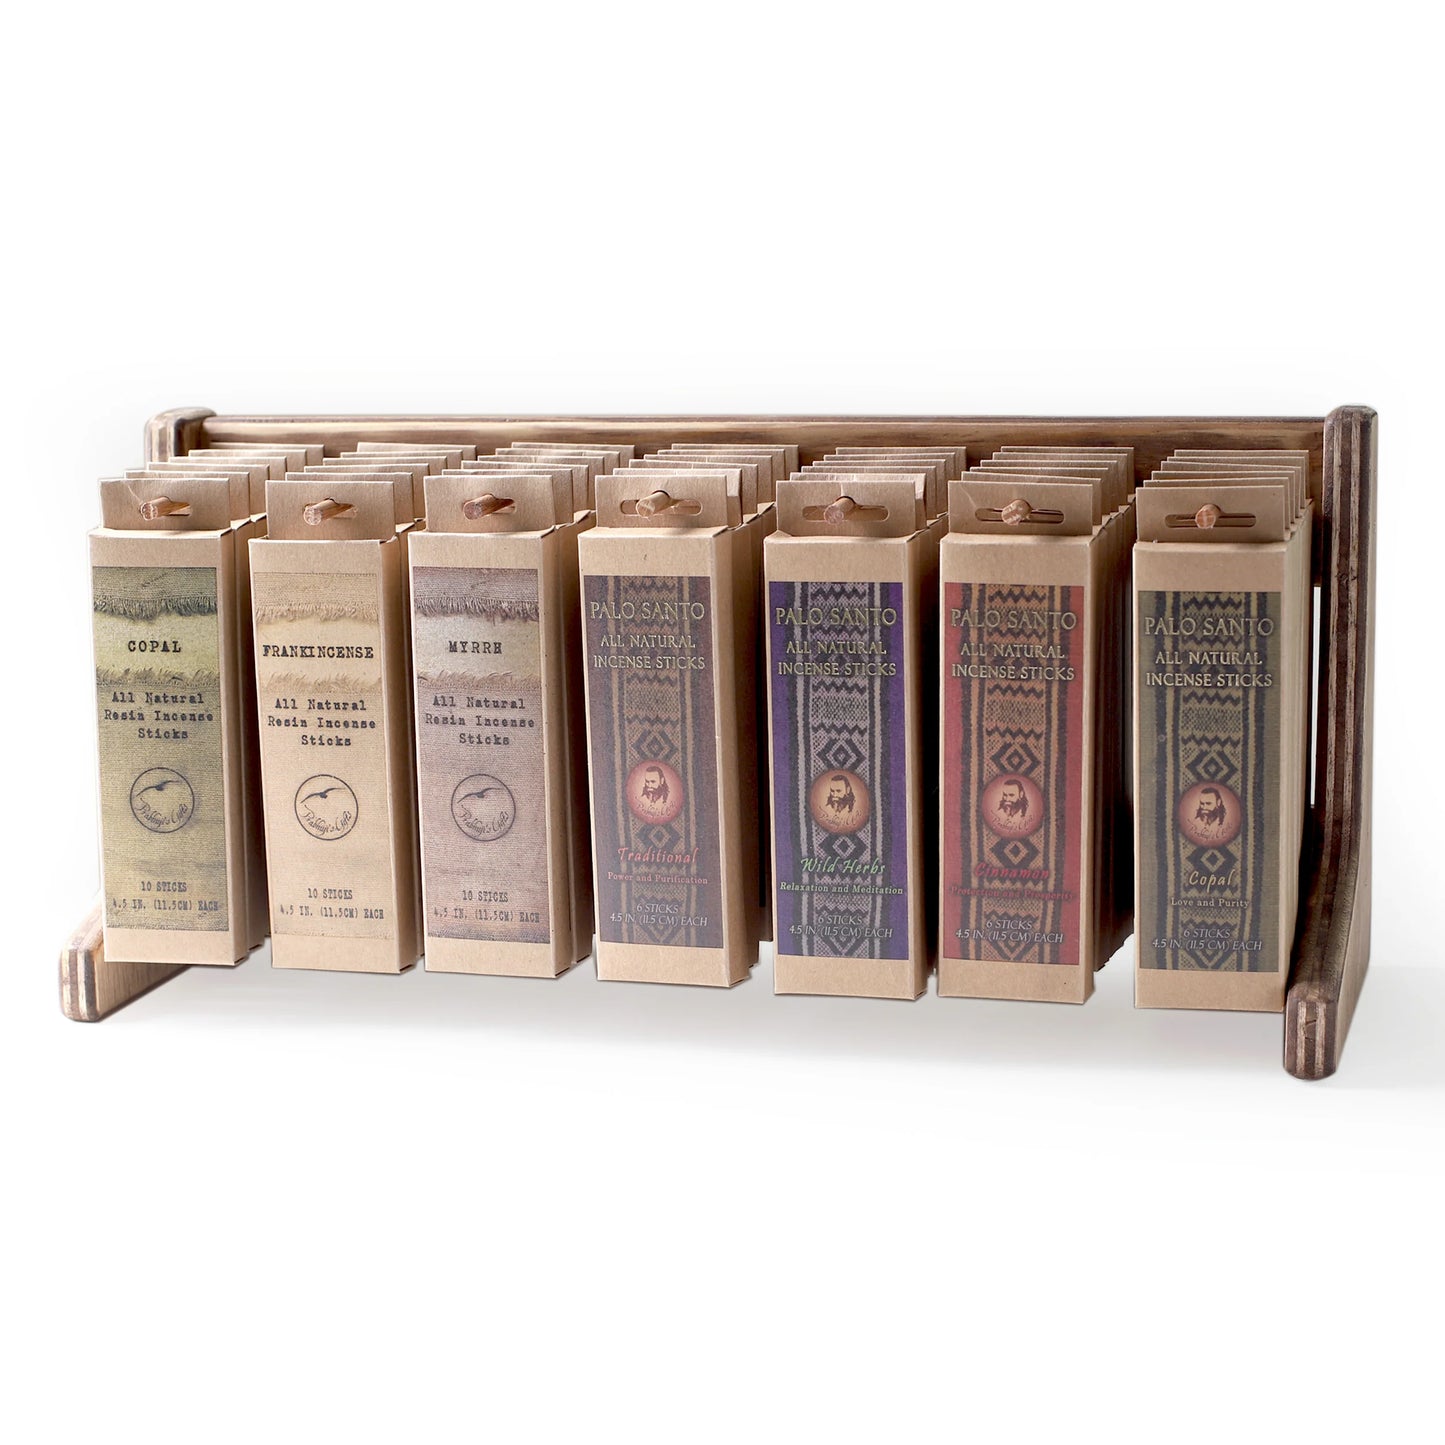 Display Rack - Palo Santo and Natural Resin Smudging Stick Incense Lines (6 packs each) - 42 Packages